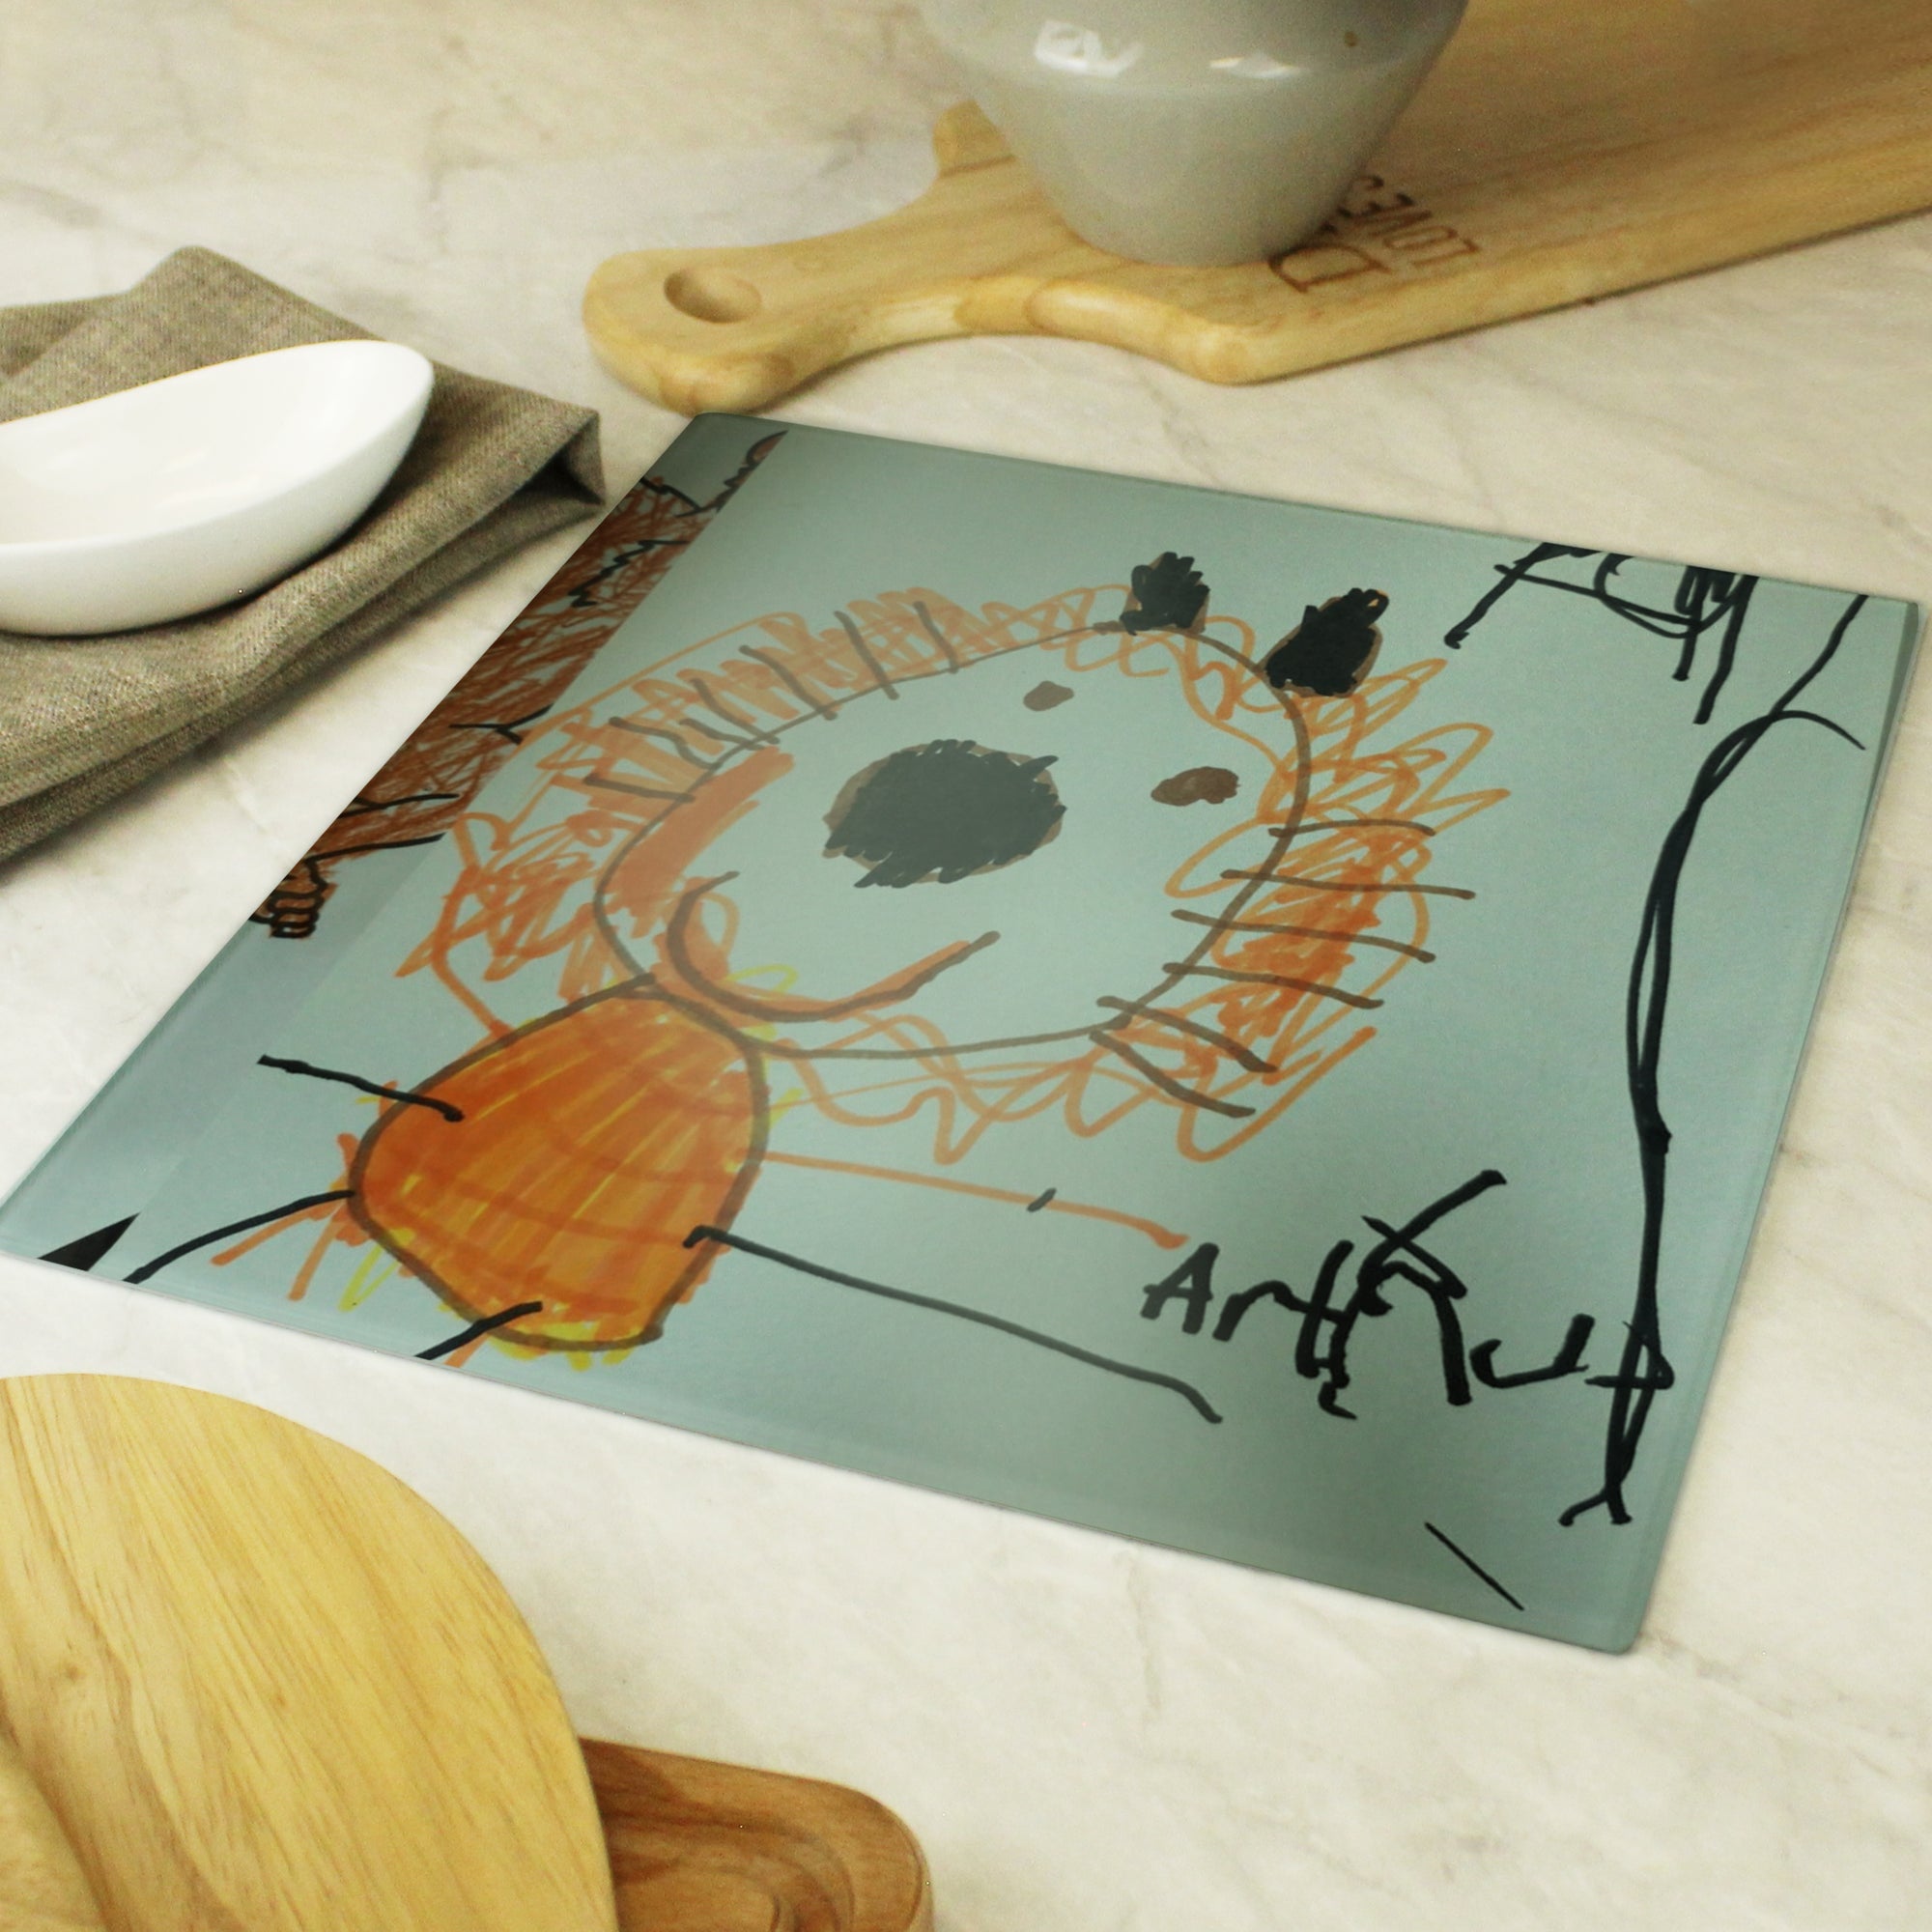 Image of a glass chopping board that can be personalised by having your child's own drawing printed on it and underneath the drawing, you can choose to add your own message or text which will be printed in a black handwritten style font.